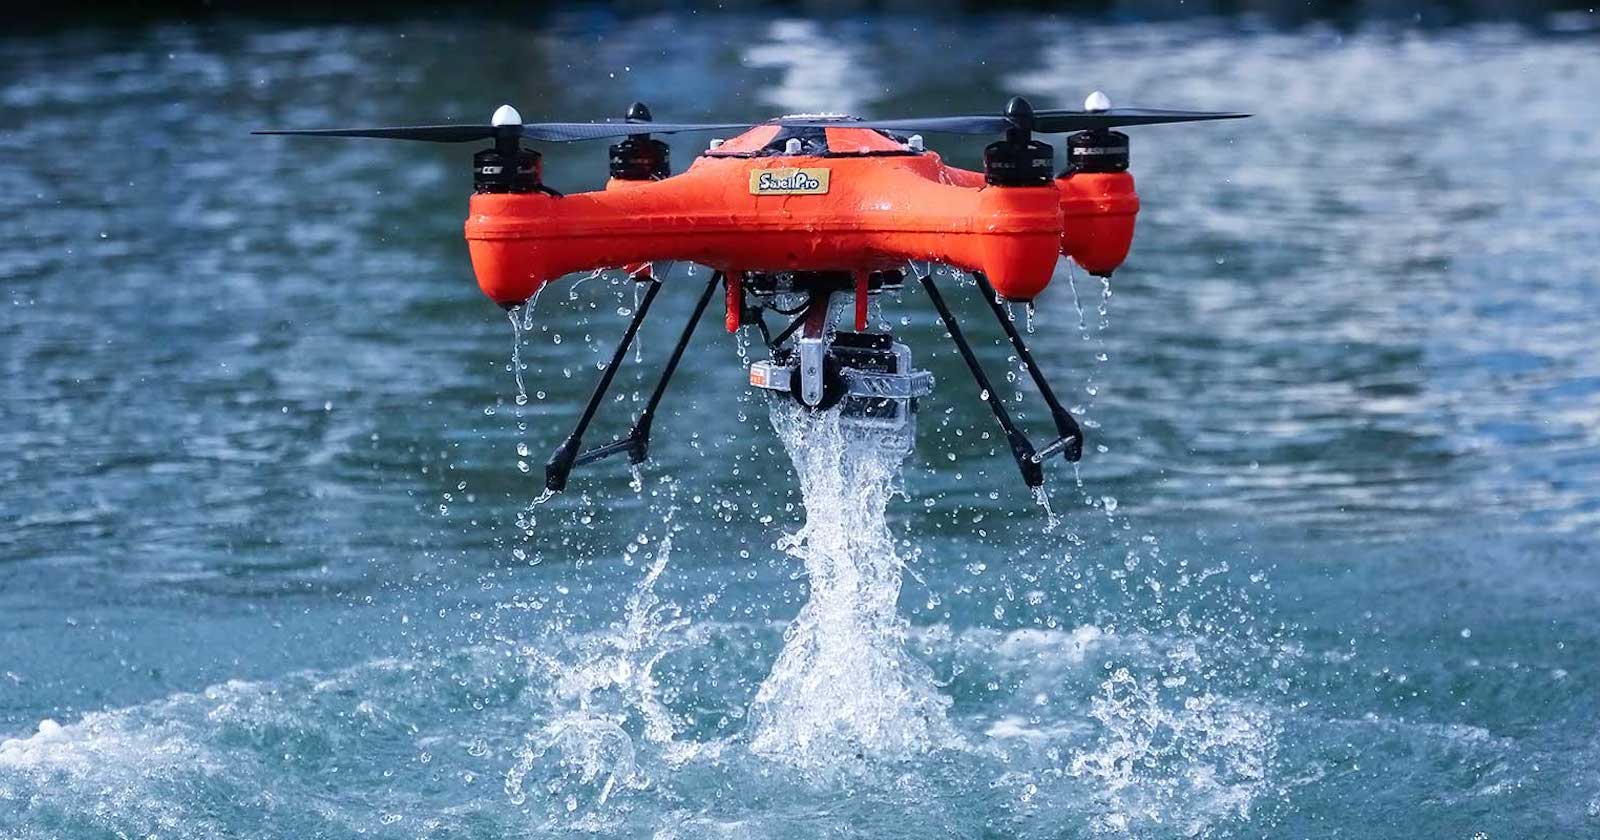 SwellPros Waterproof Drones Dont Just Fly, They Float to Film Underwater